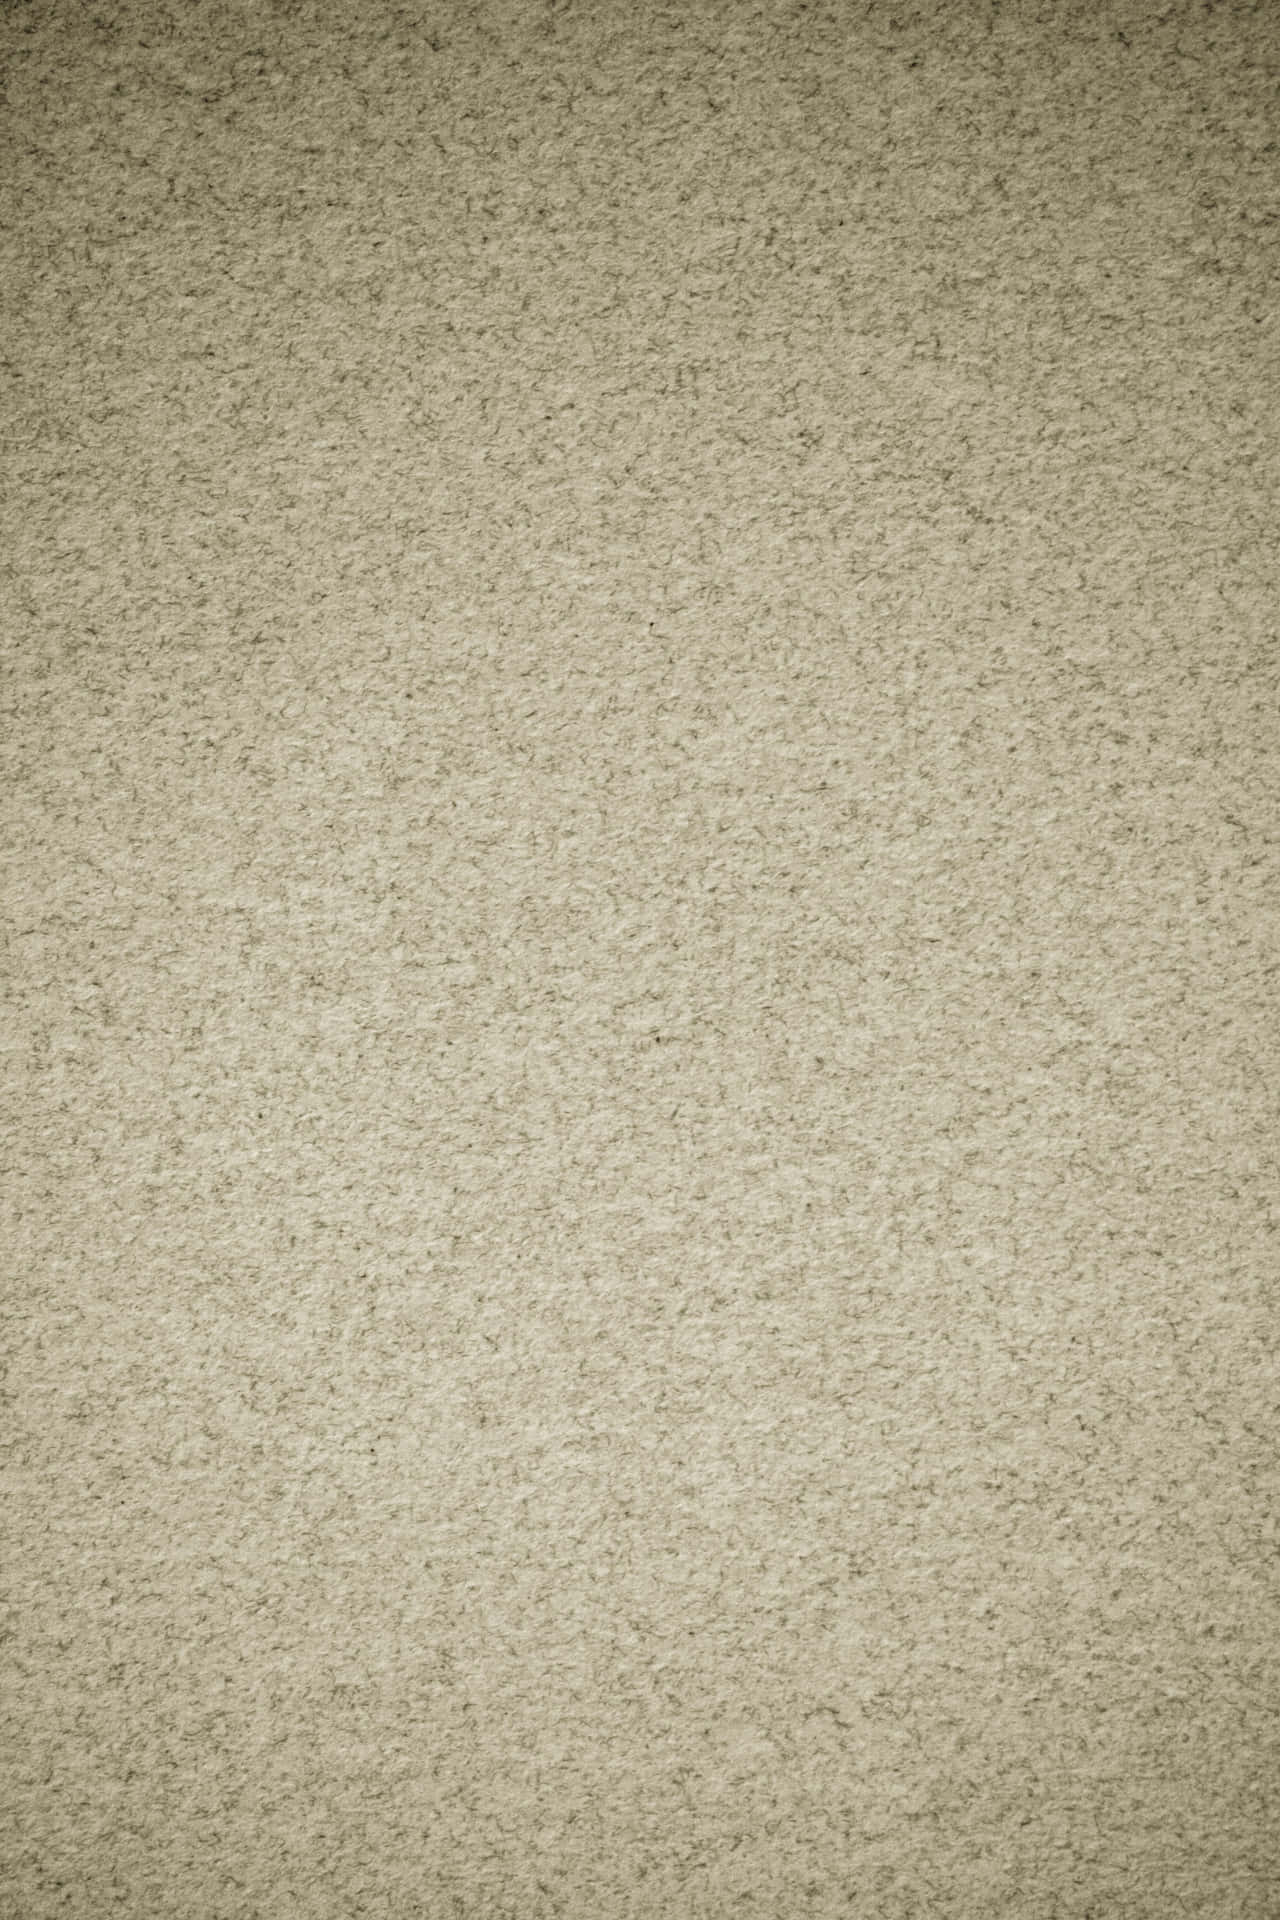 A Beige Background With A Beige Texture